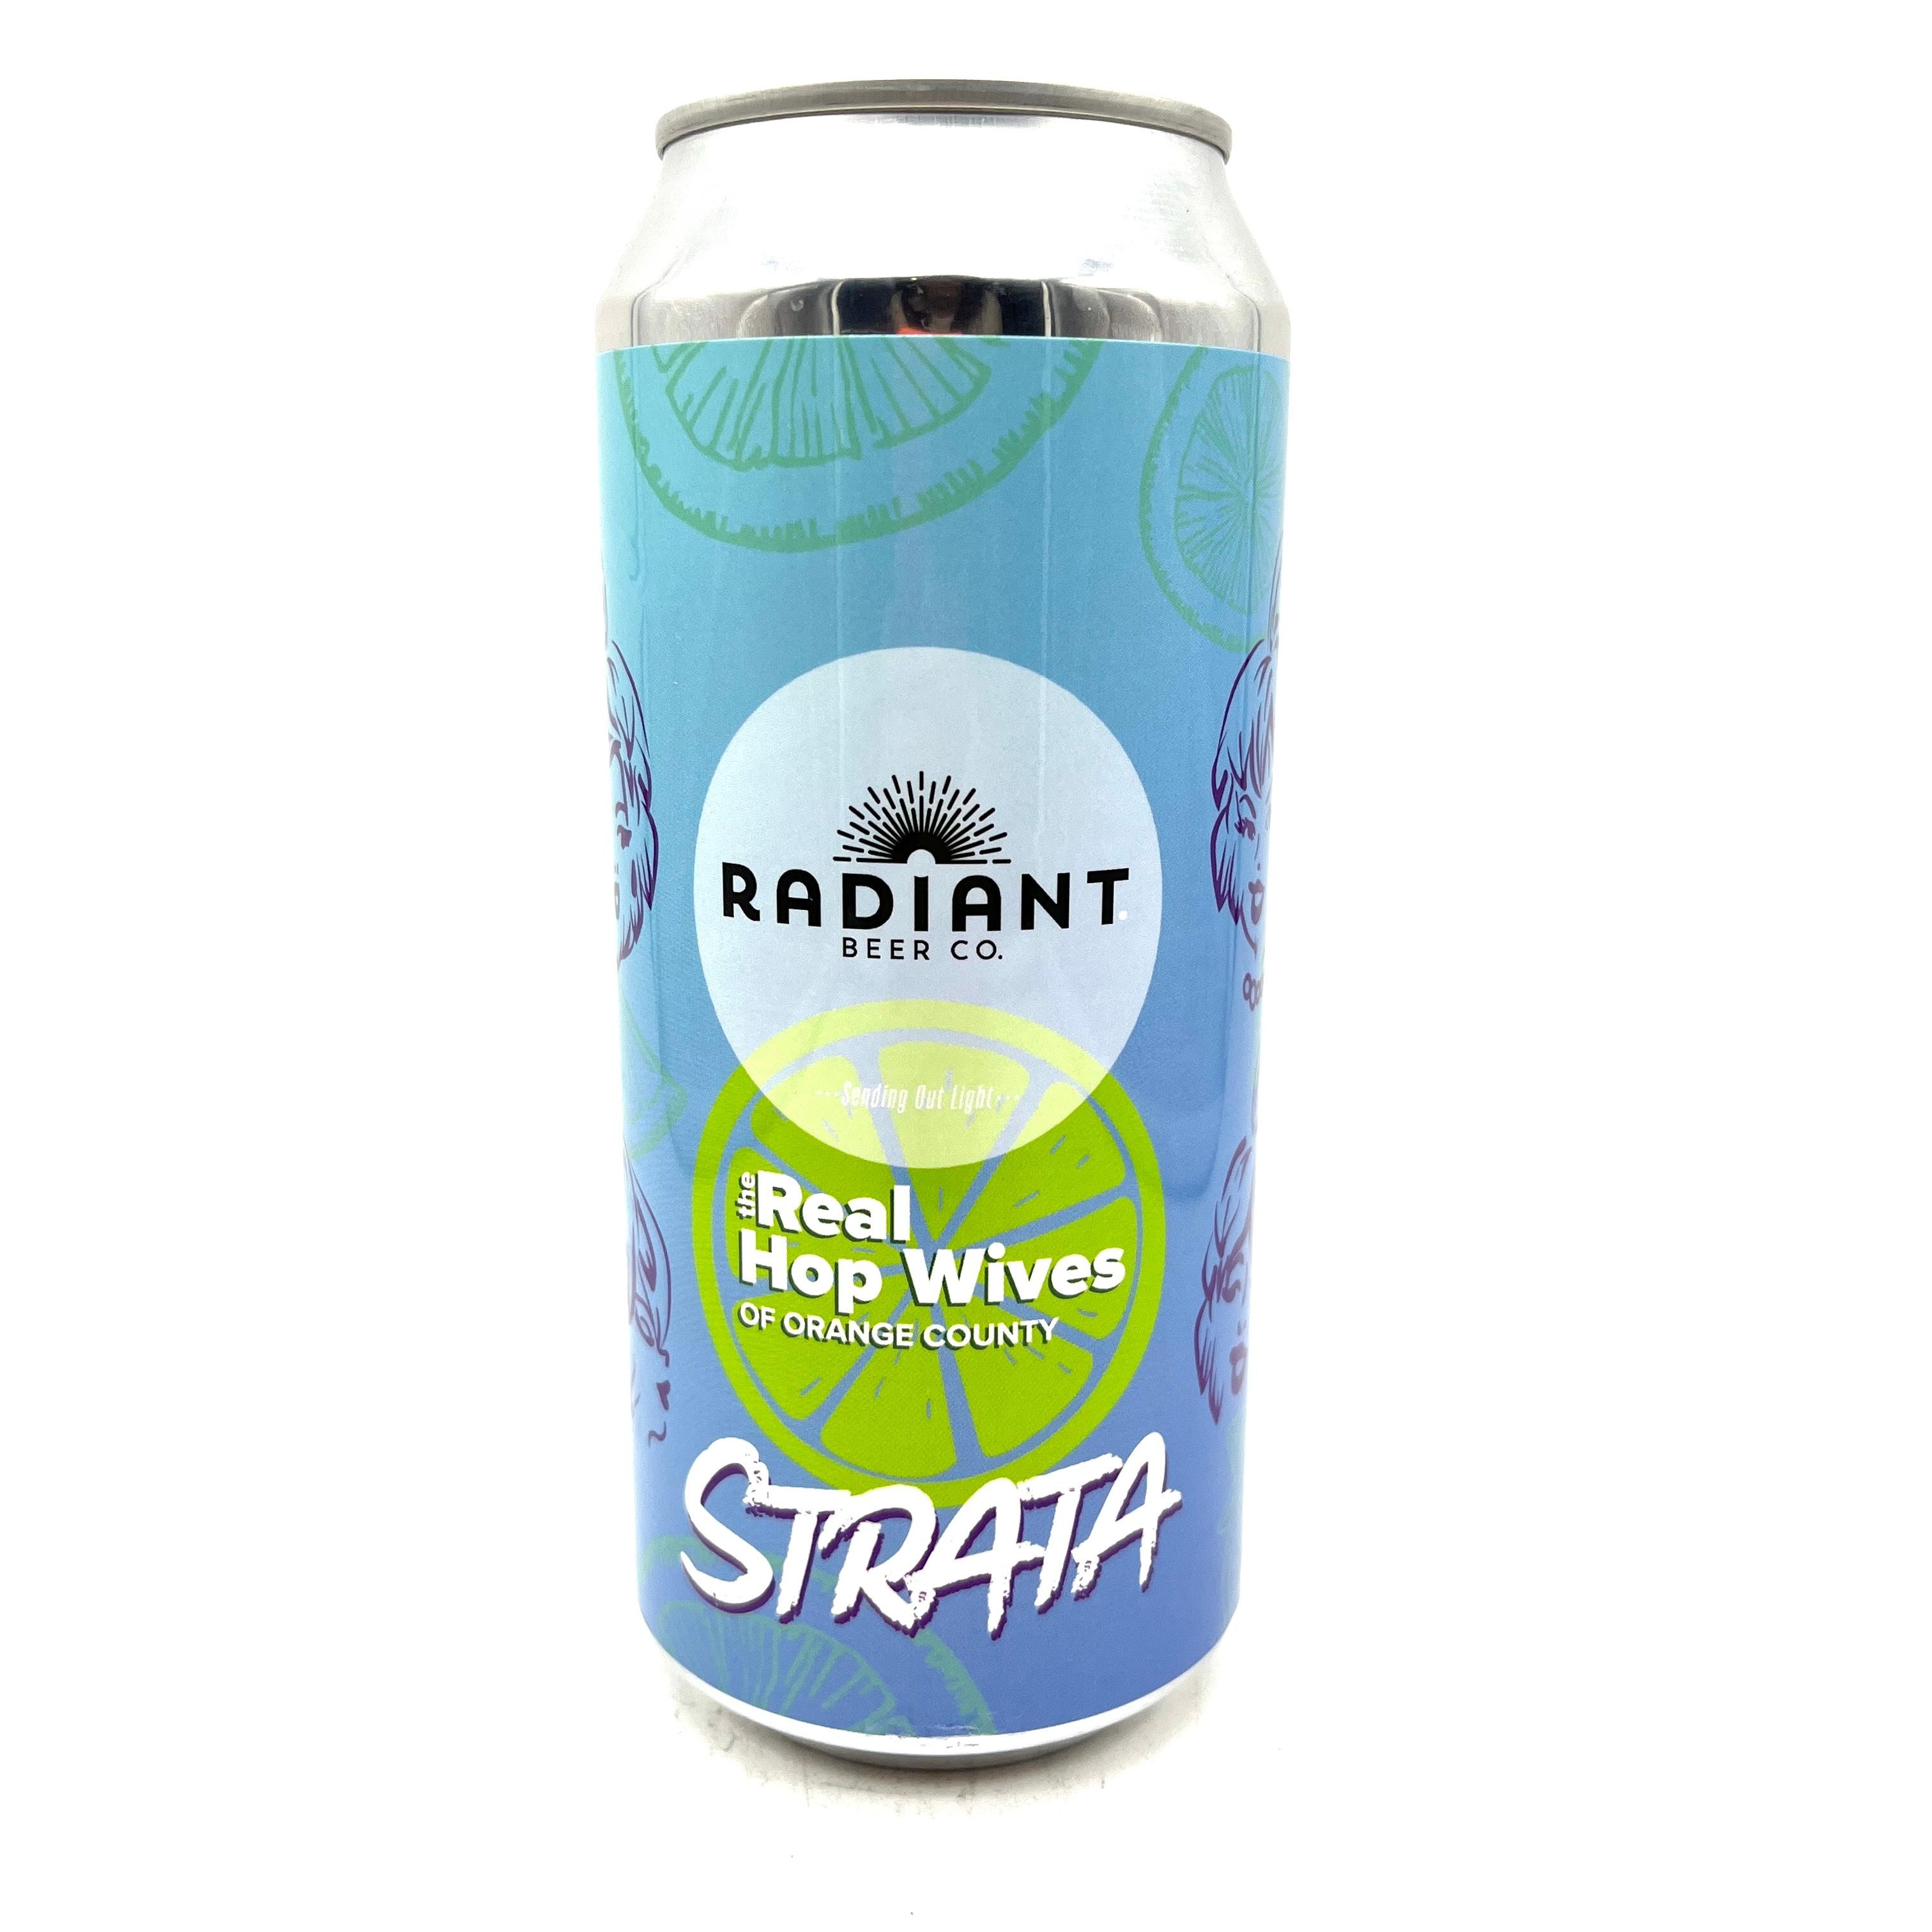 Radiant - The Real Hop Wives of Orange County: Strata